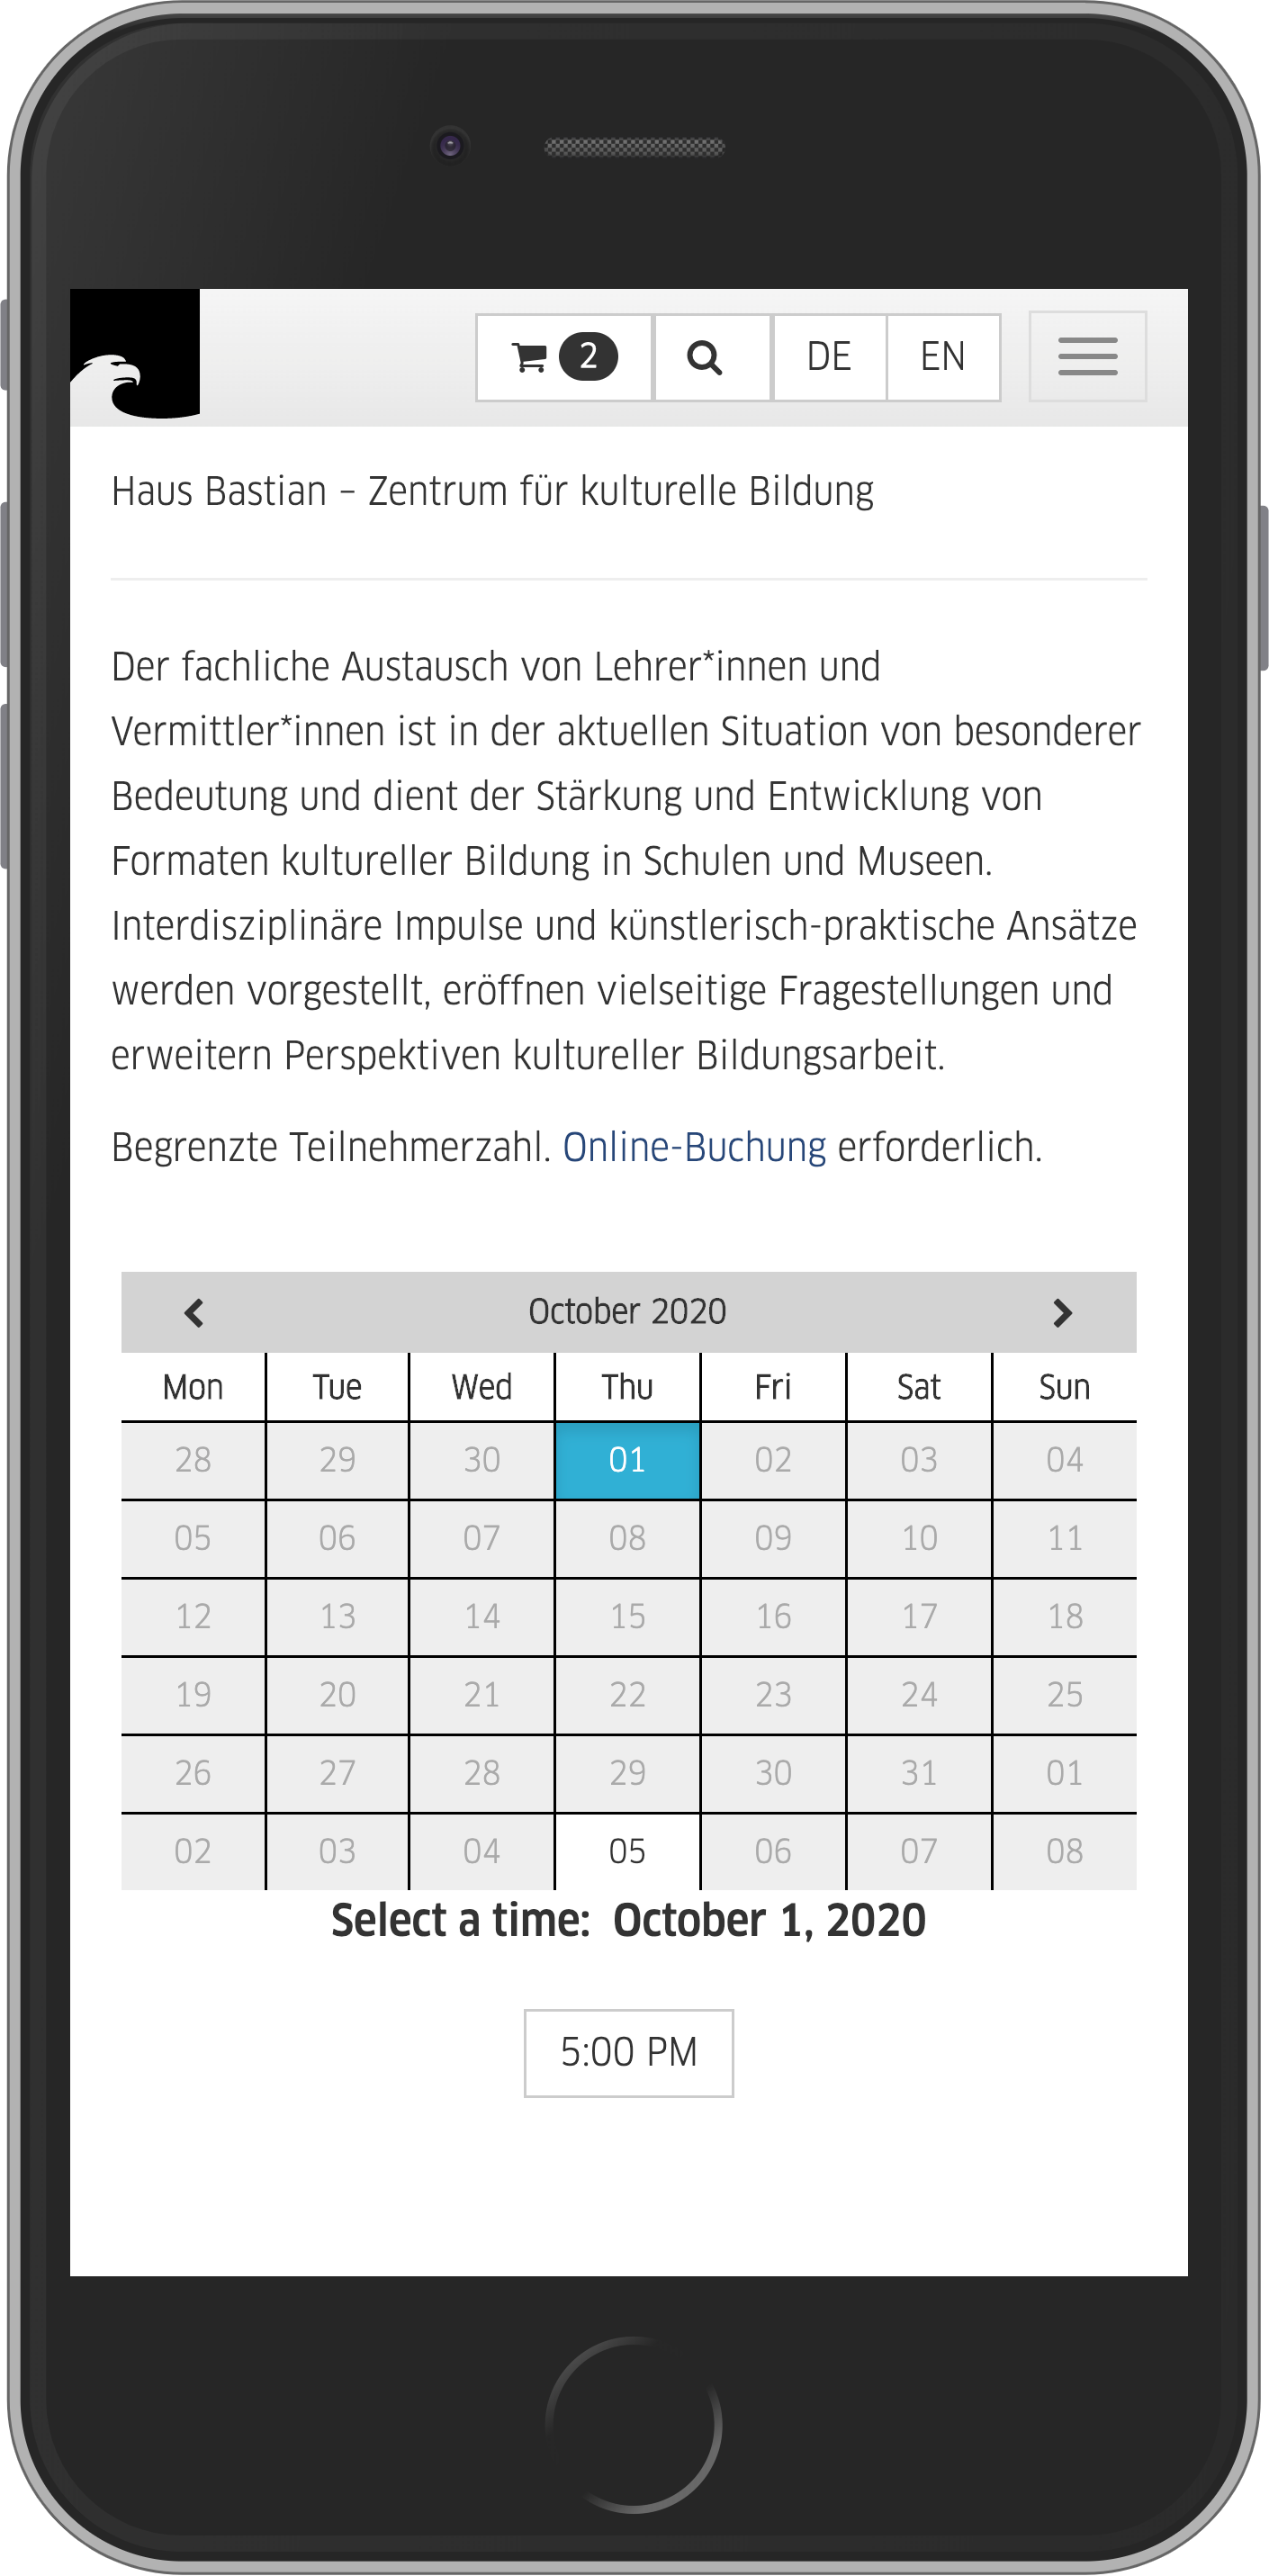 Mobile view of event details and date selection in event booking process in online shop of Staatliche Museen zu Berlin (Berlin State Museums)